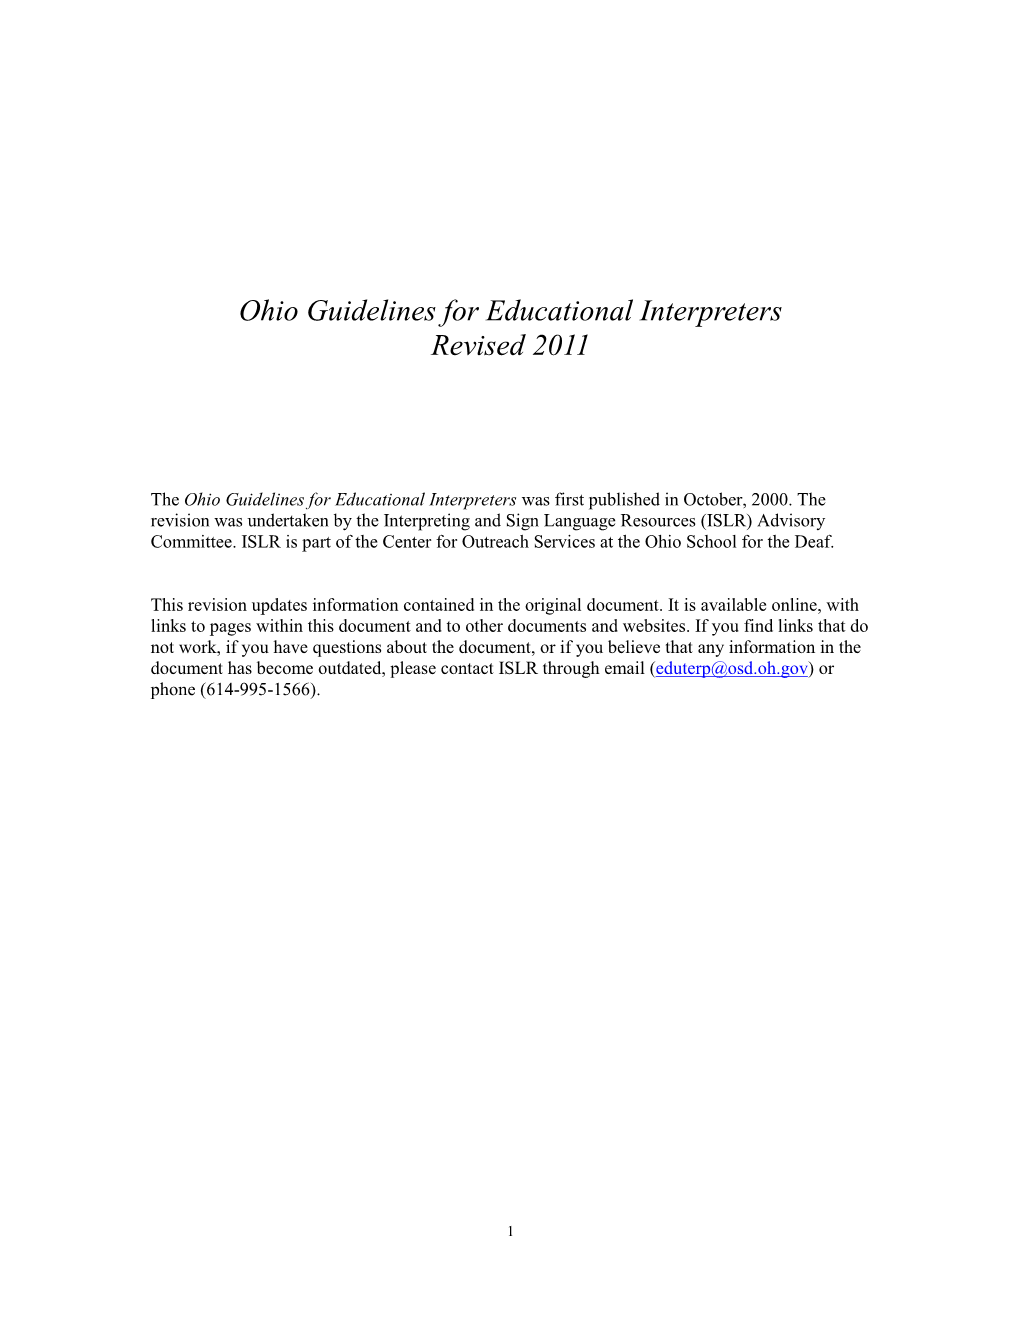 Ohio Guidelines for Educational Interpreters Revised 2011